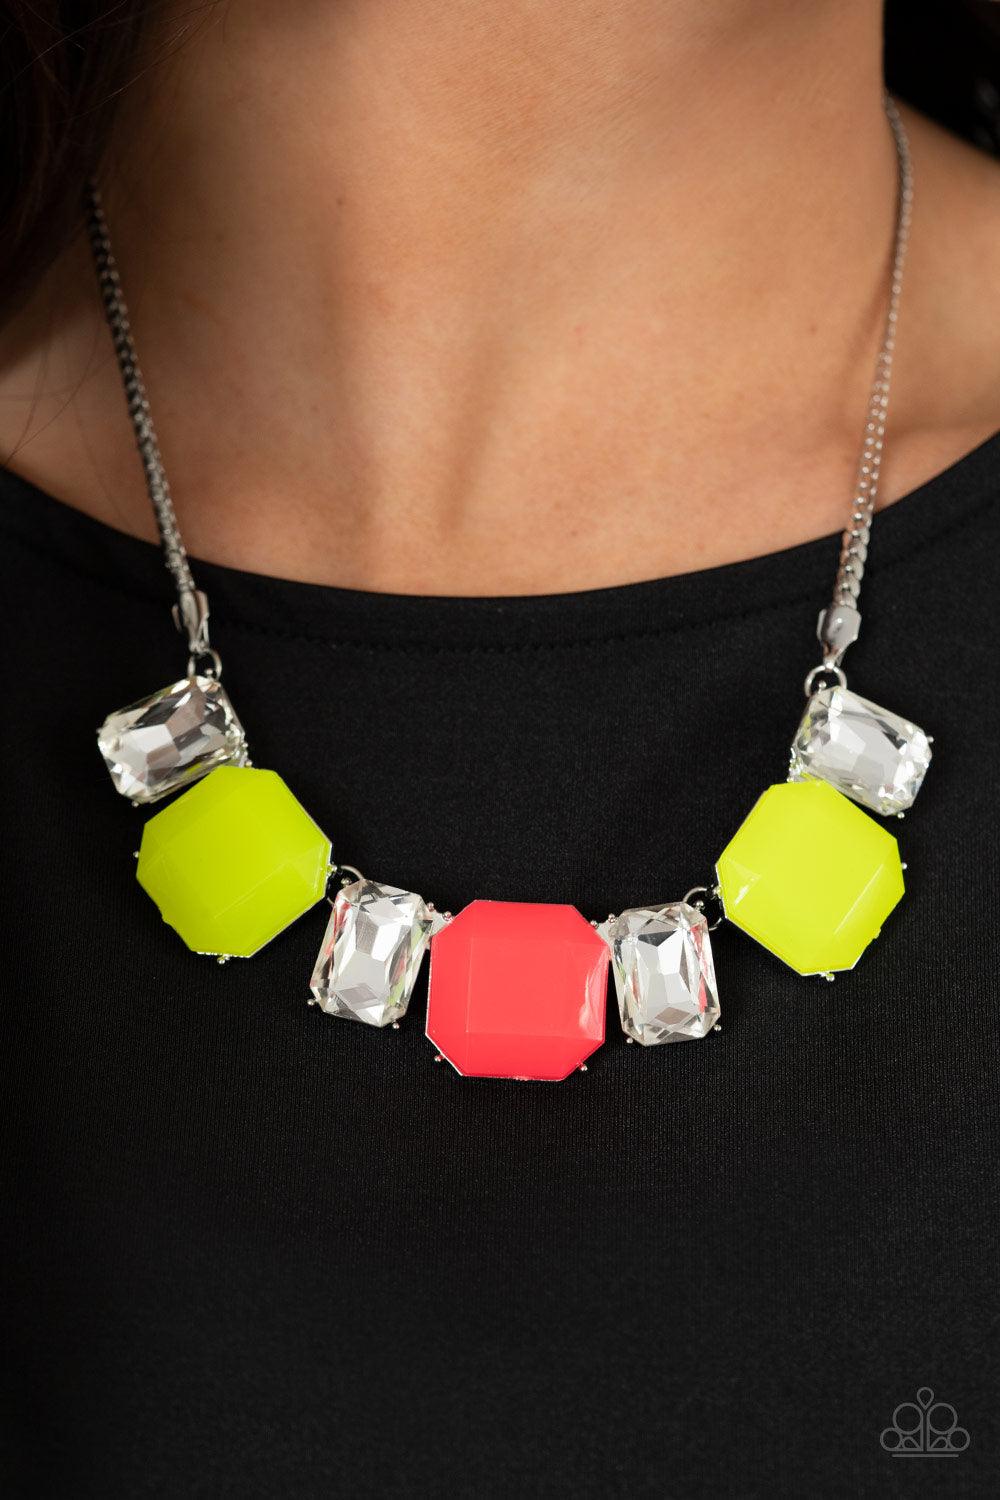 Paparazzi Accessories Royal Crest - Multi Neon yellow and pink beads connect with exaggerated emerald style white rhinestones, creating vivacious sparkle below the collar. Features an adjustable clasp closure. Sold as one individual necklace. Includes one